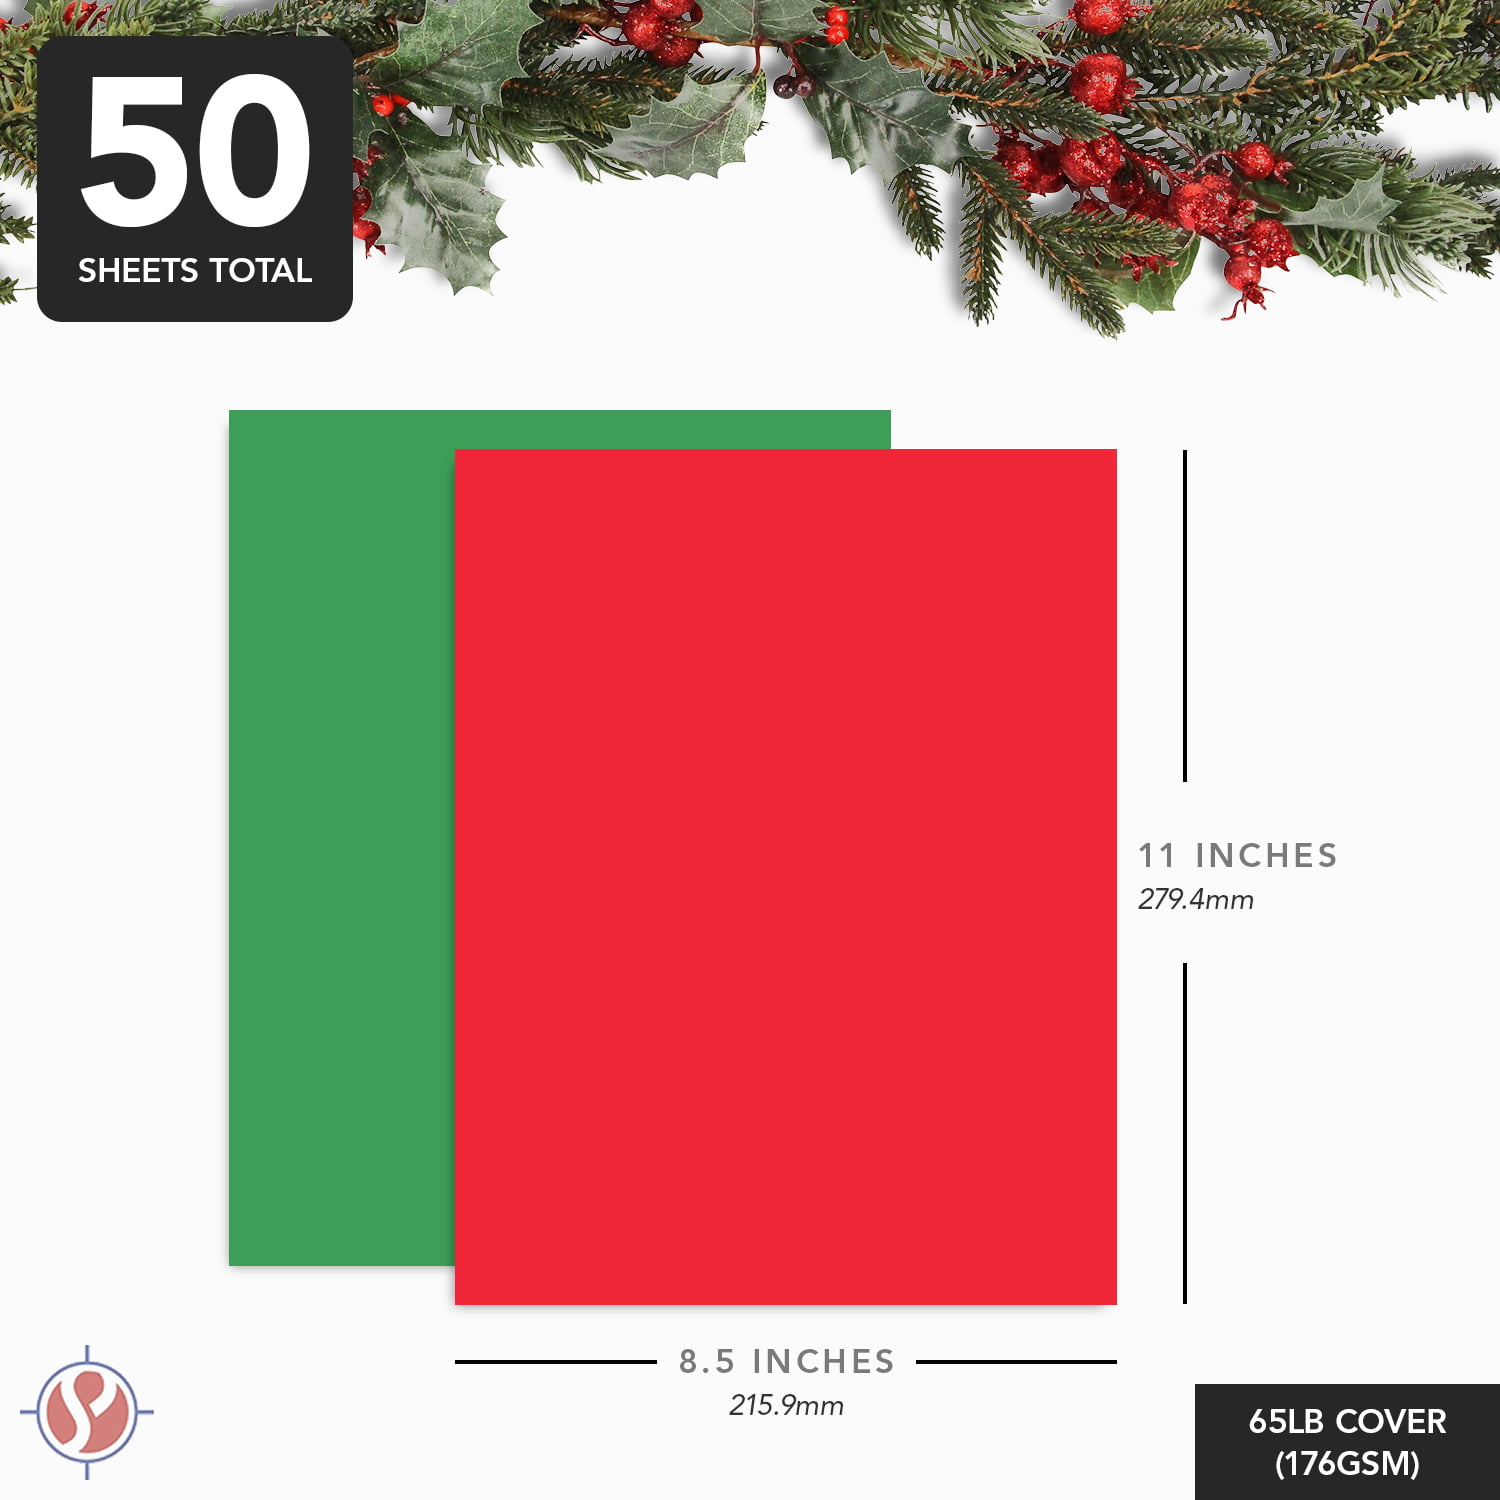 Red Discount Card Stock for Christmas cards, invitations and flyers -  CutCardStock